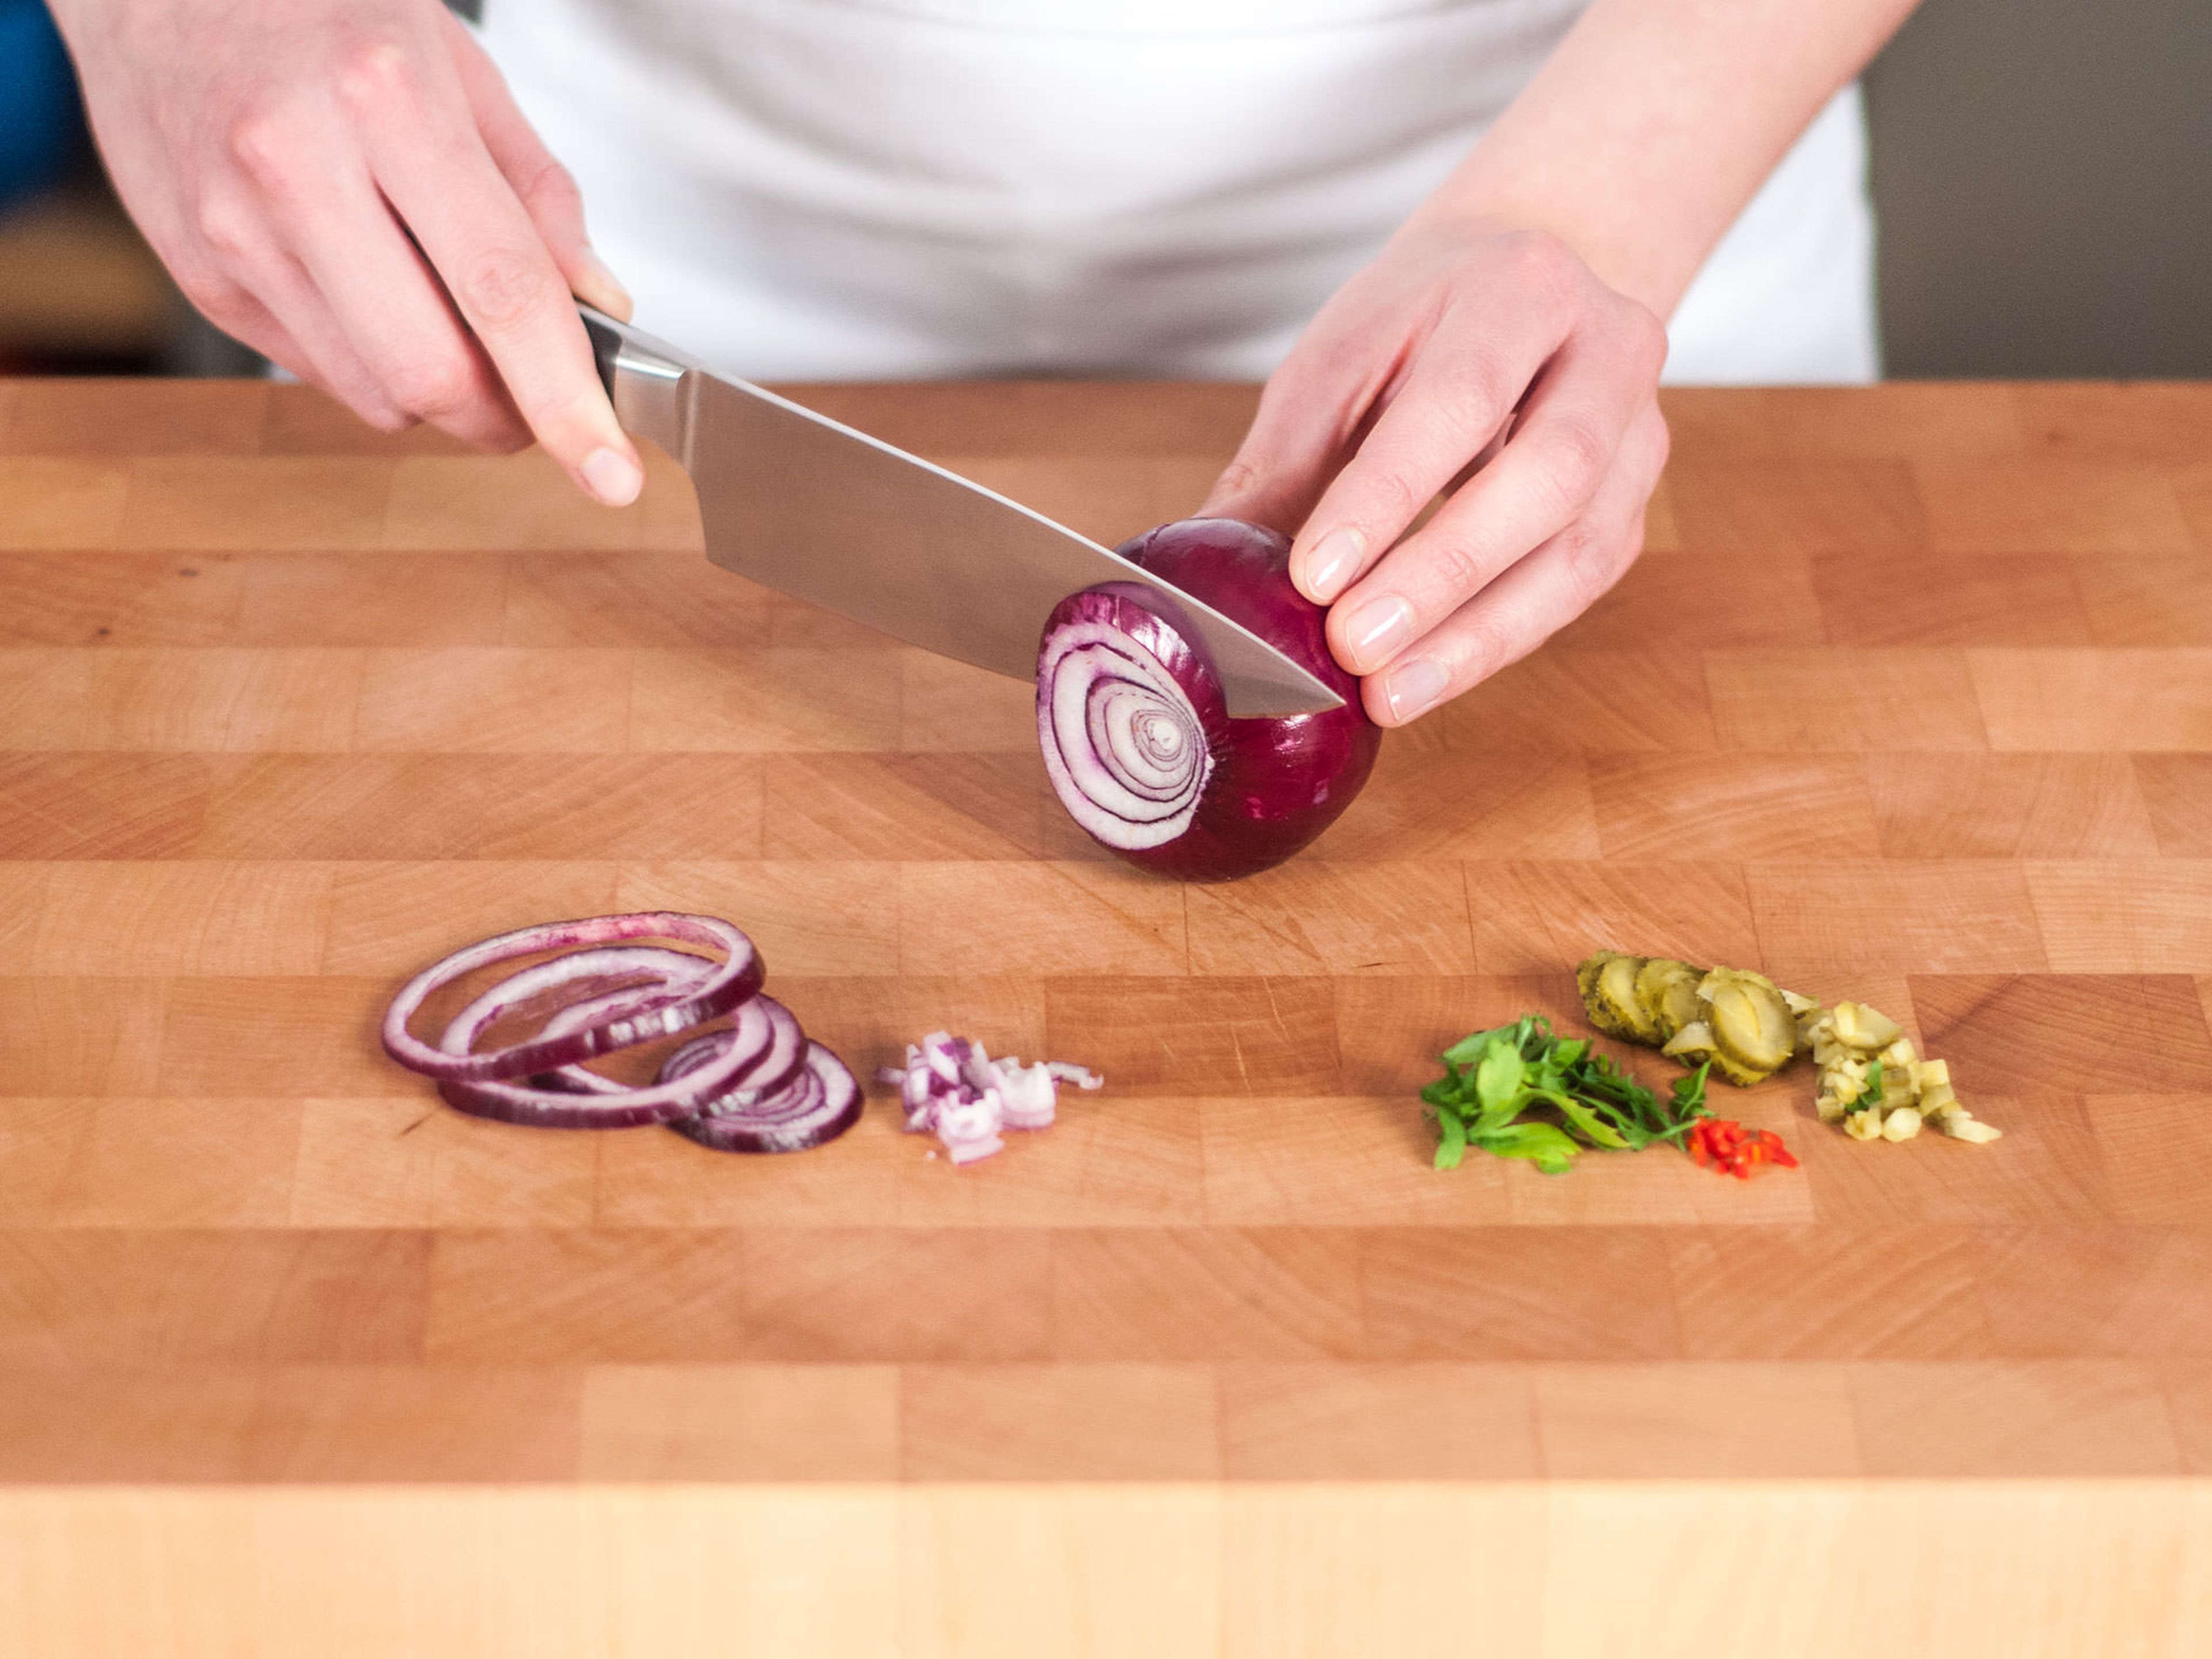 Chop pickles, reserving pickle water. Finely chop red chili, parsley, and chives. Slice red onion into fine rings.